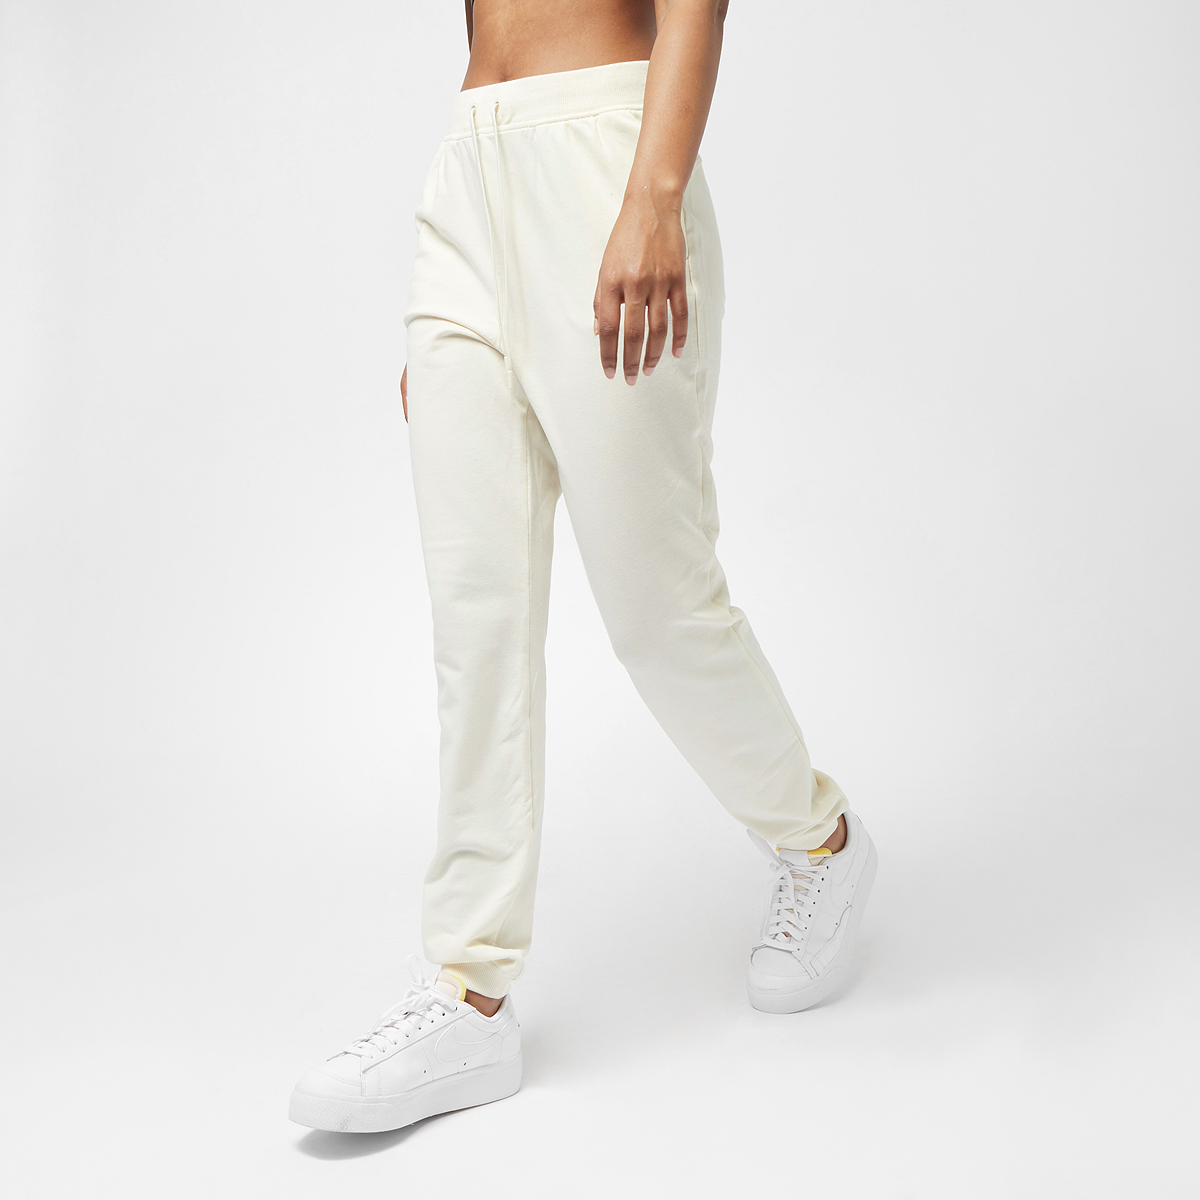 Productafbeelding: PW Knit Pants ivory